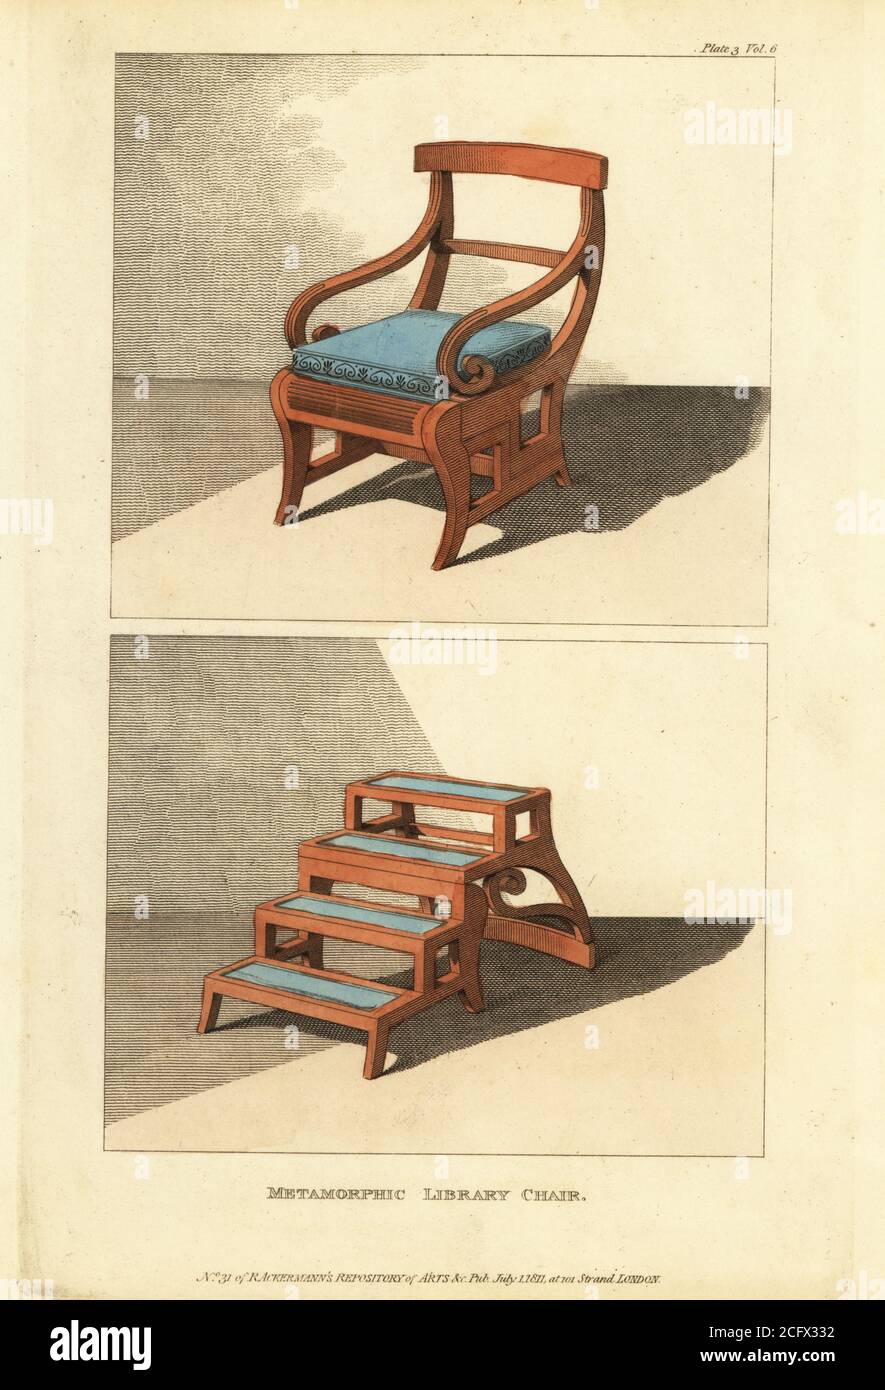 Metamorphic library chair, 1811. It has curved back legs like the Trafalgar chair, armrests, cushion, and folds out into a step ladder. Patented by Robert Campbell, manufactured by Thomas Morgan and Joseph Stanley, Catherine Street, Strand. Handcoloured copperplate engraving from The Upholsterer's and Cabinet-Maker's Repository consisting of seventy-six designs of modern and fashionable furniture, Rudolph Ackermann, London, 1830. Stock Photo